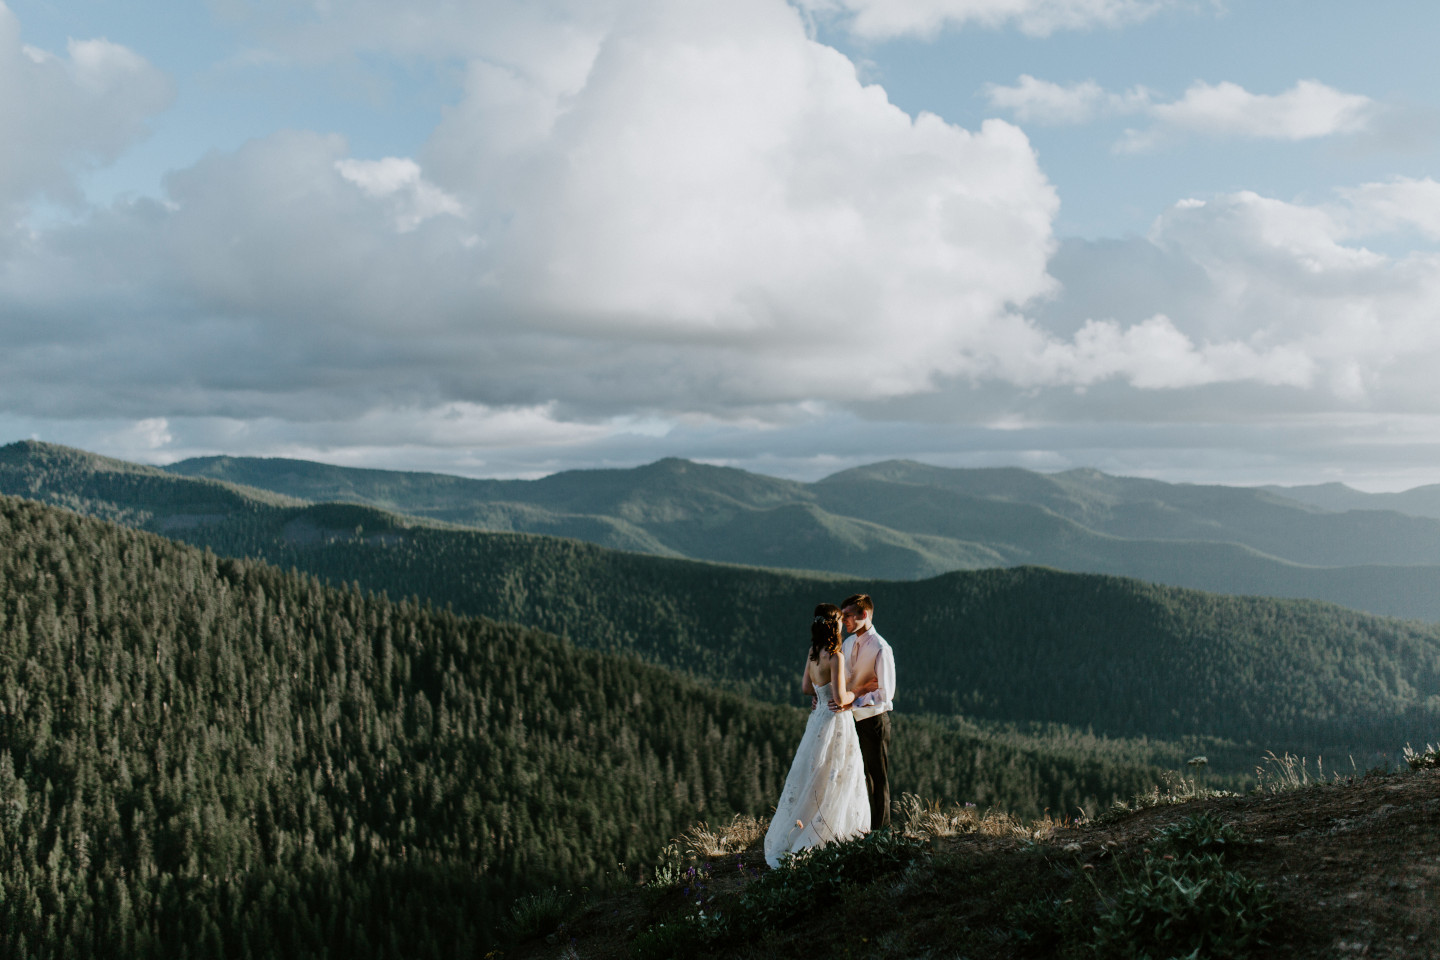 Moira and Ryan move in for a kiss at Mount Hood. Adventure elopement wedding shoot by Sienna Plus Josh.